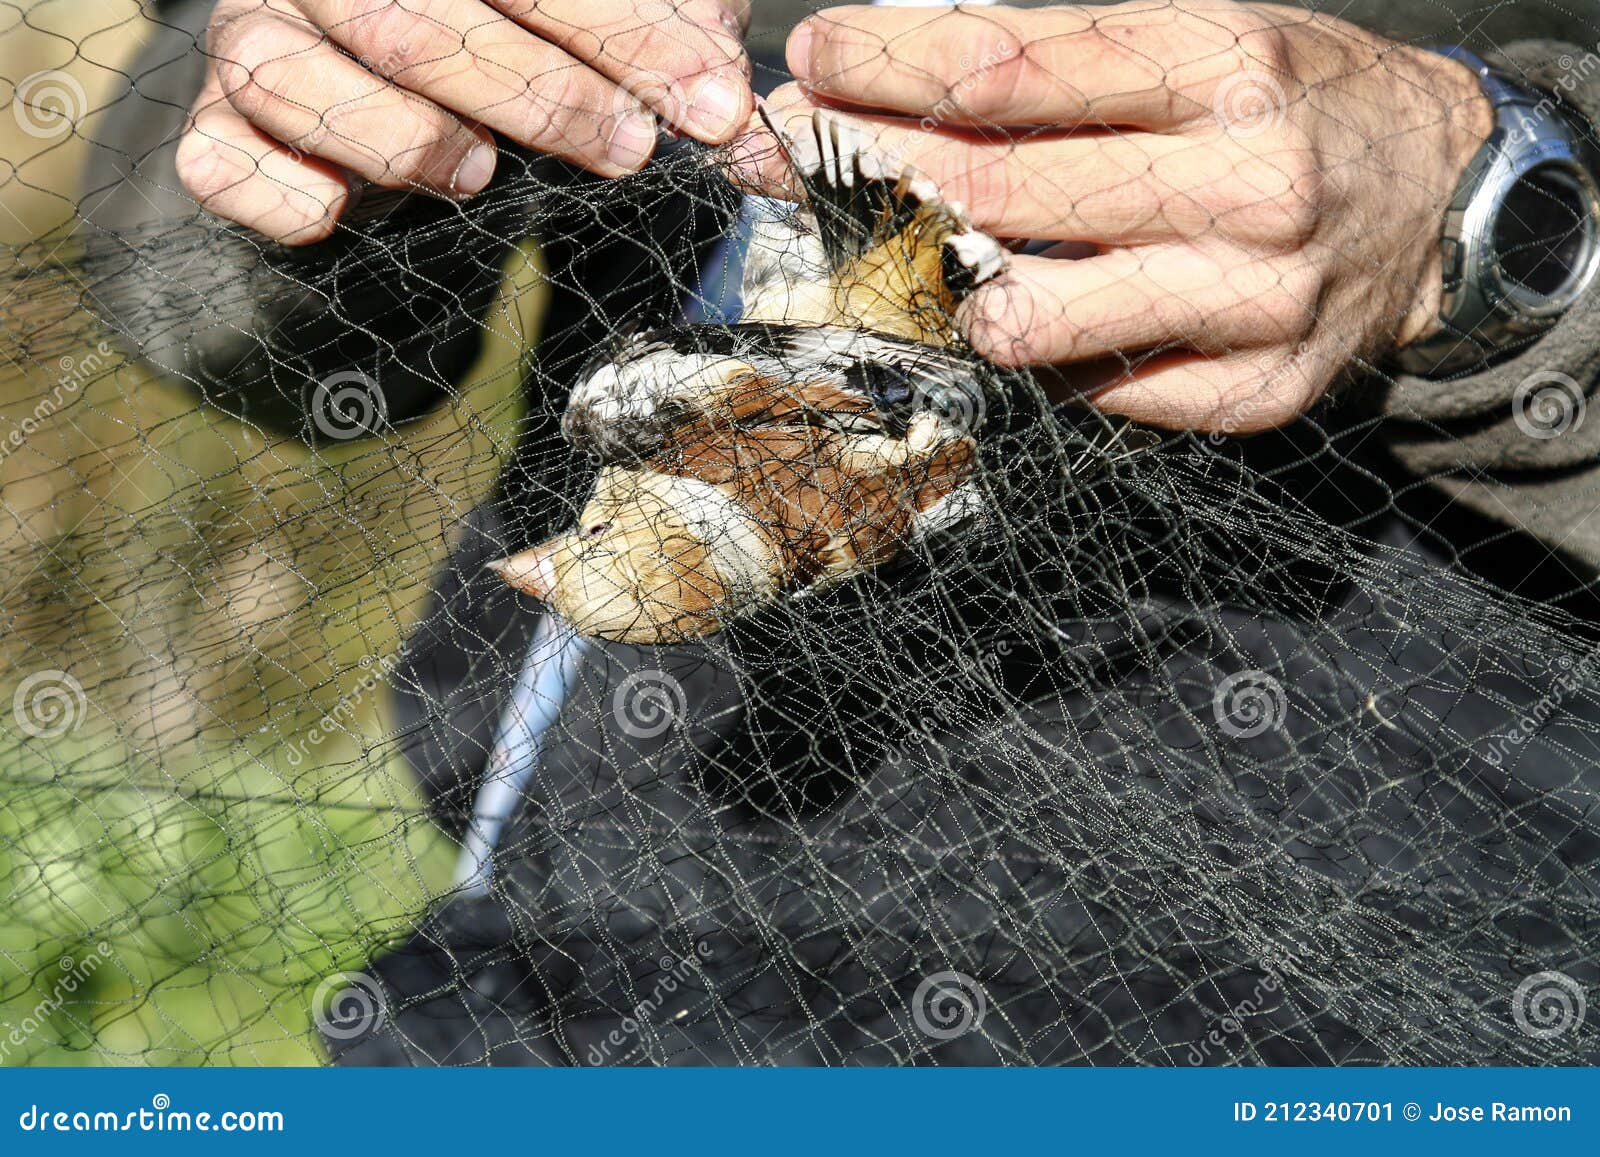 the hands of an ornithologist releasing a hawfinch, coccothraustes coccothraustes, from a bird net for field study.